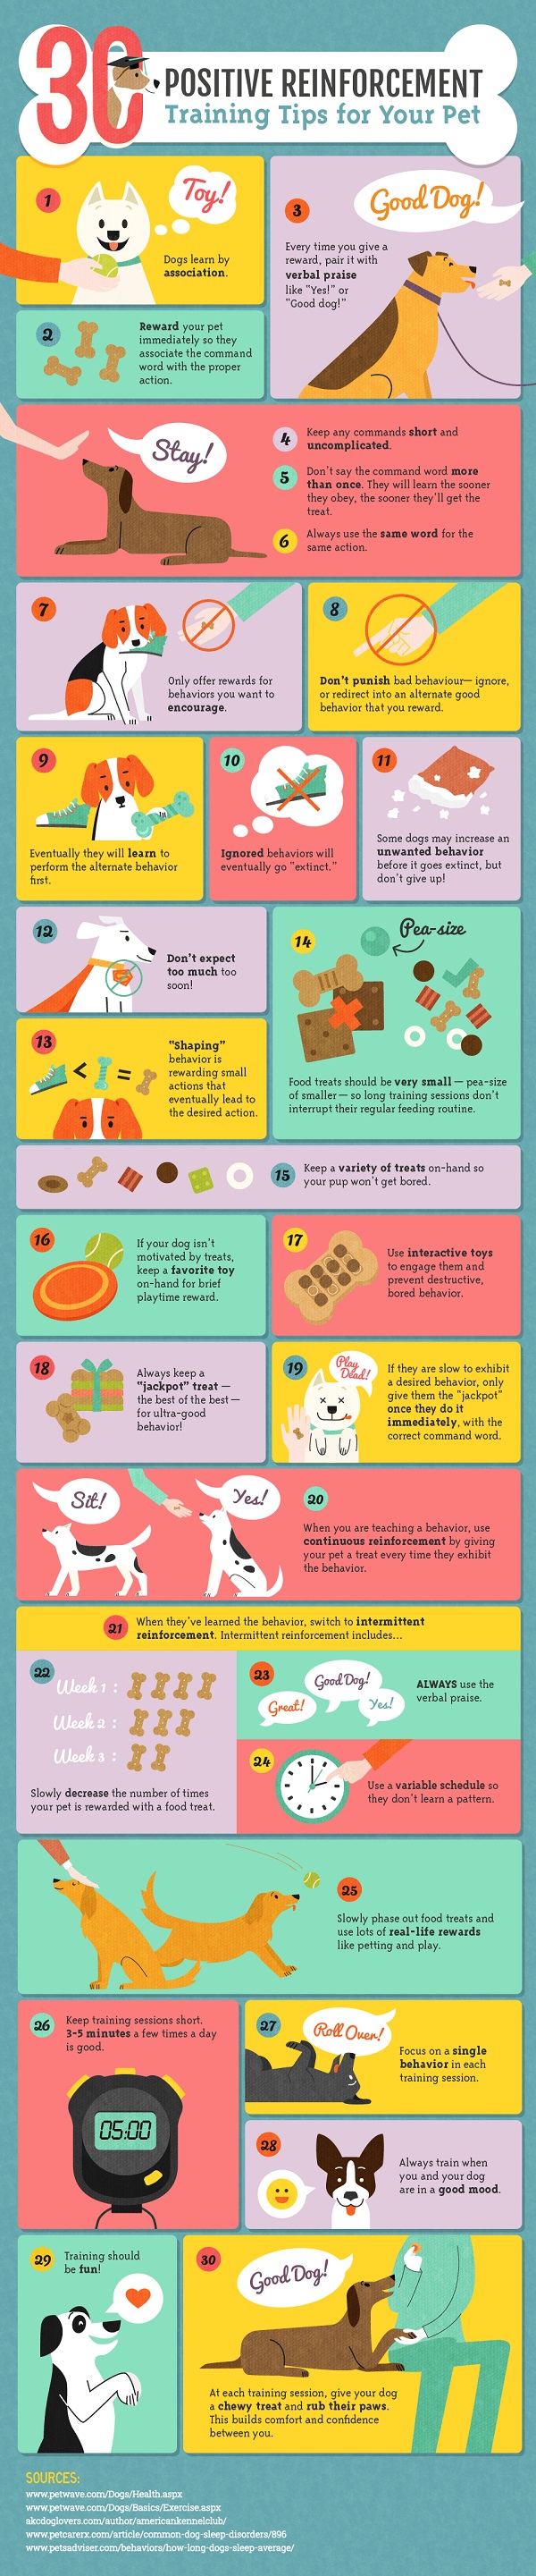 Positive Reinforcement Training for Dogs-Infographic by Amber Kingsley